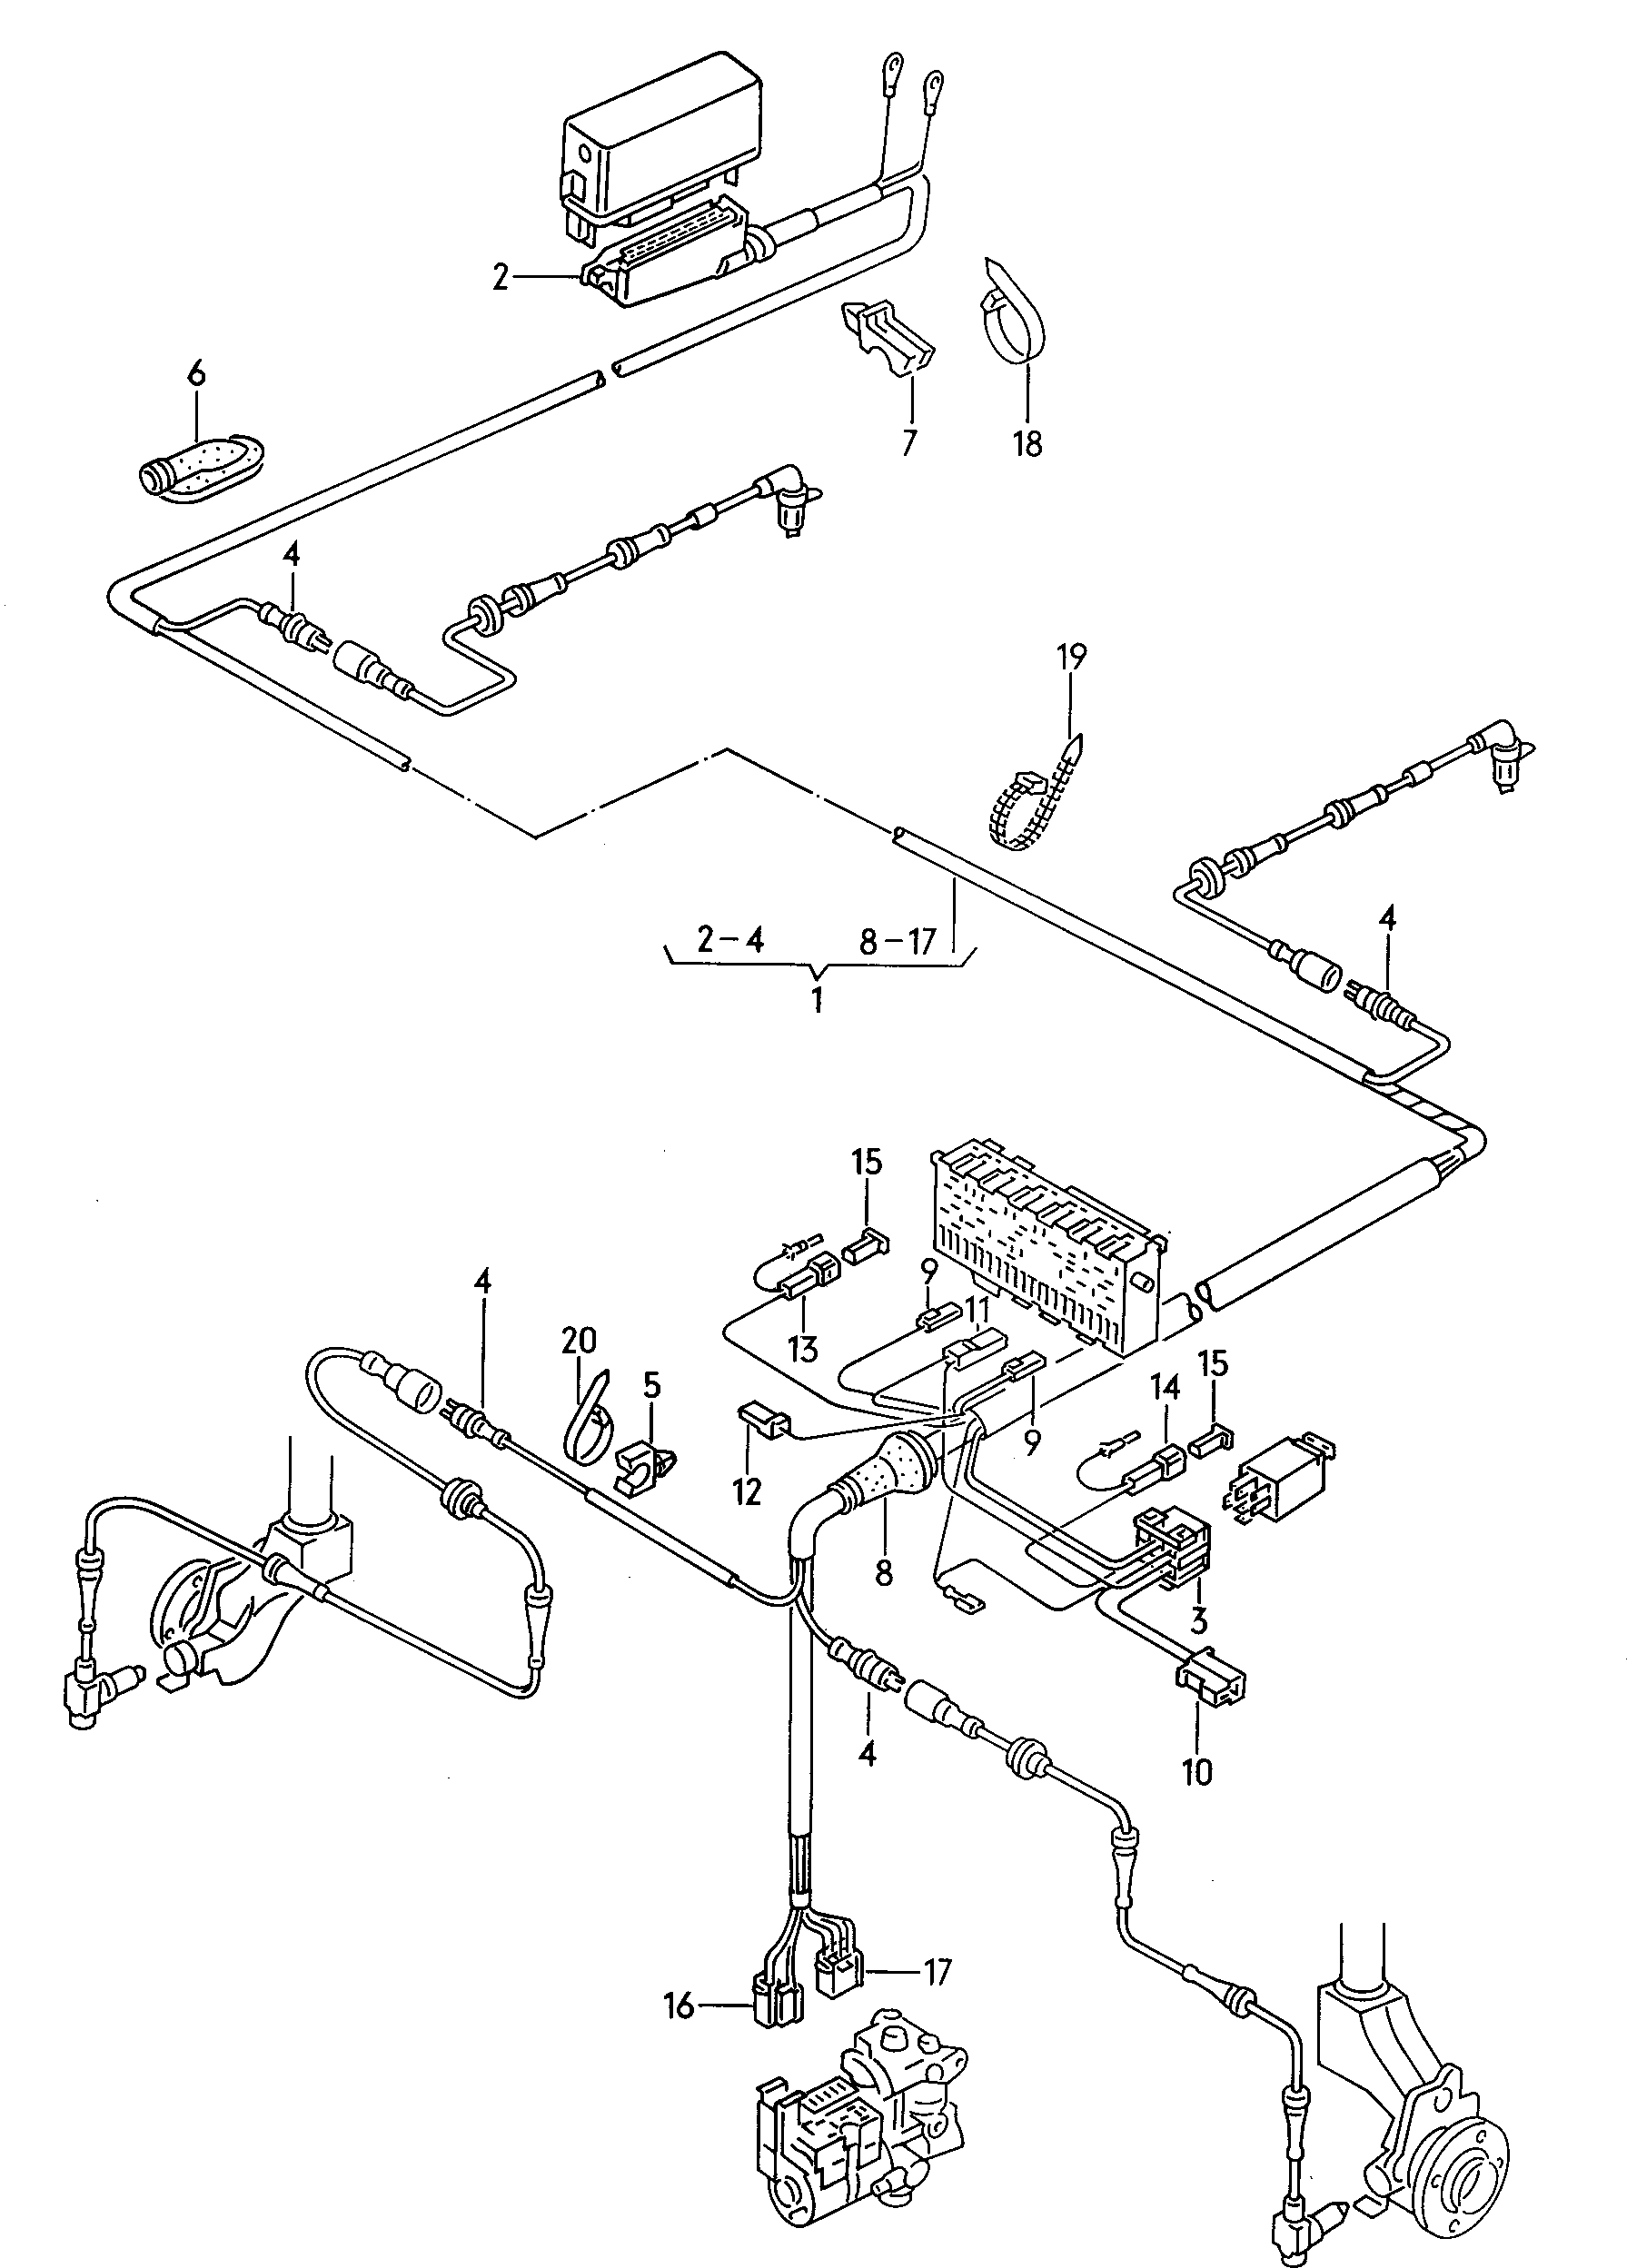 wiring harness for anti-lock<br>brakesystem             -abs-             see illustration:  118-060 - Audi 4000 - a40